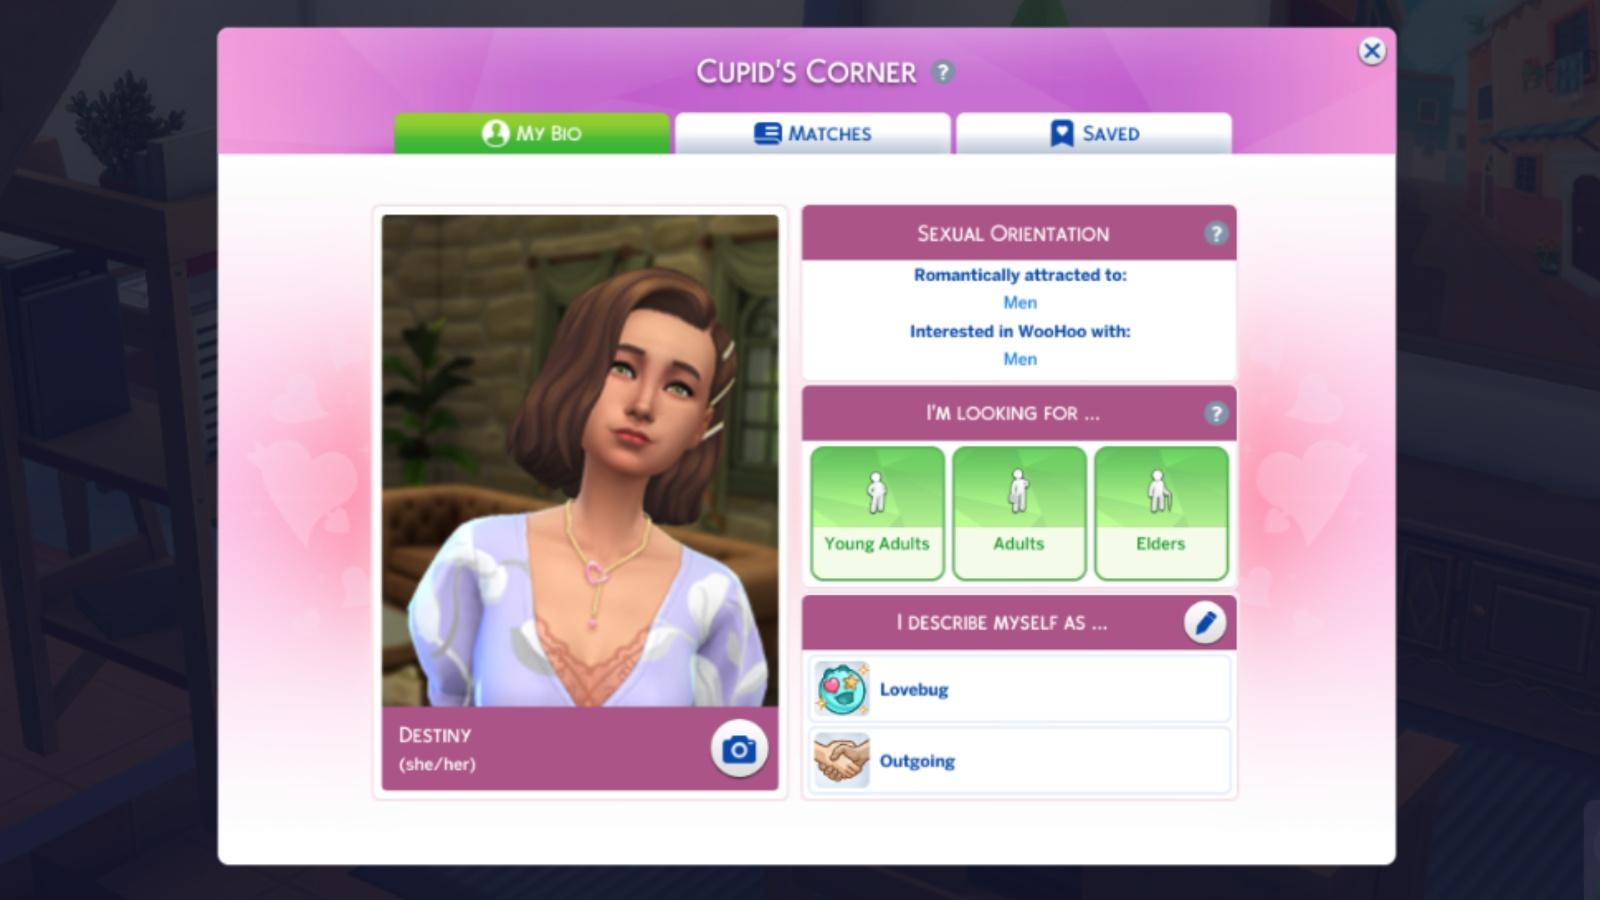 A screenshot featuring the Cupid's Corner dating app in The Sims 4.